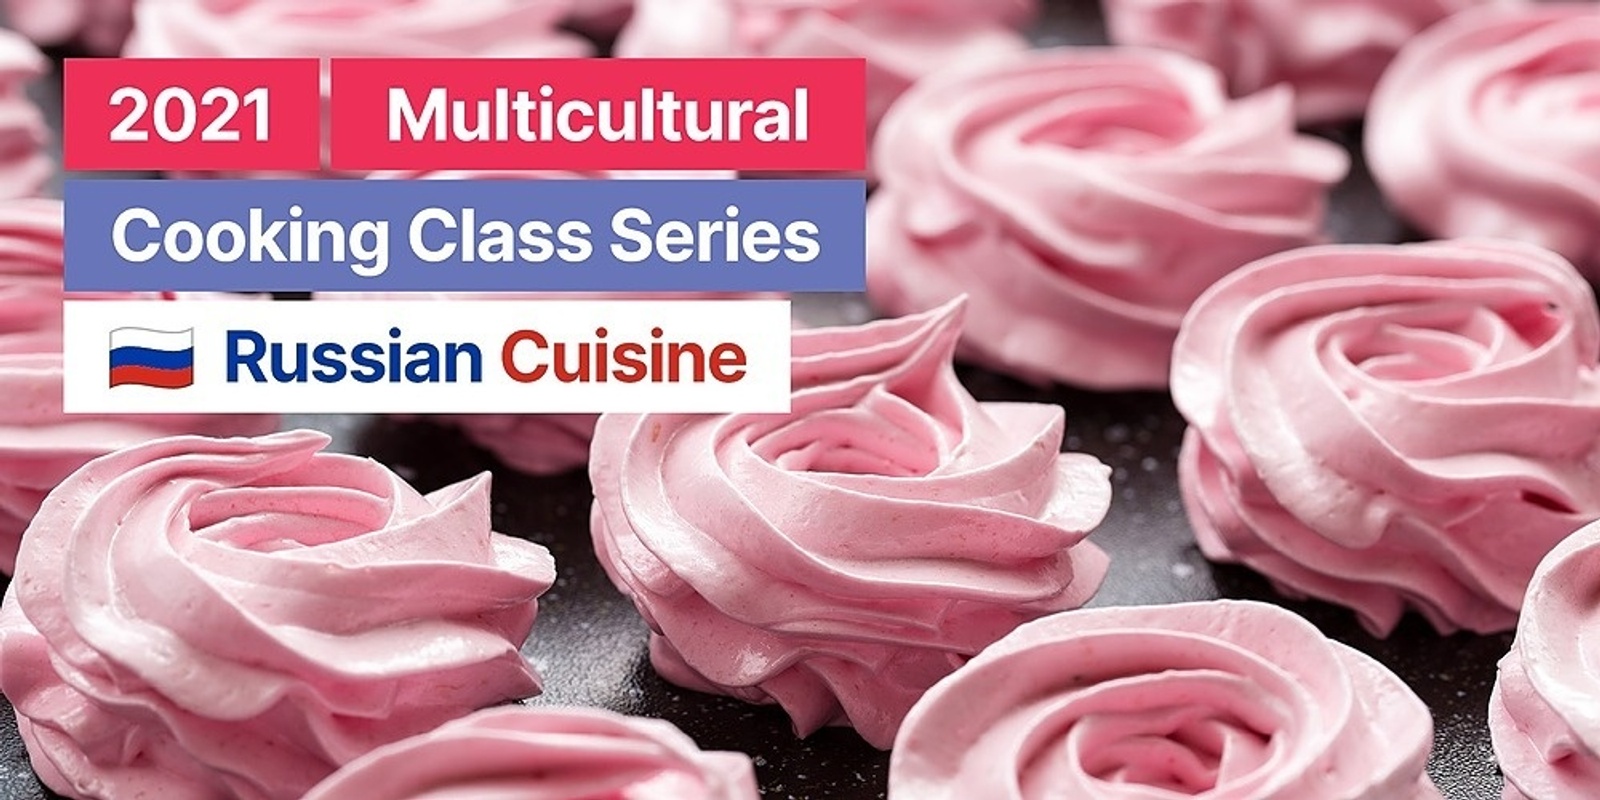 Banner image for 2021 Multicultural Cooking Class Series - Russian Cuisine